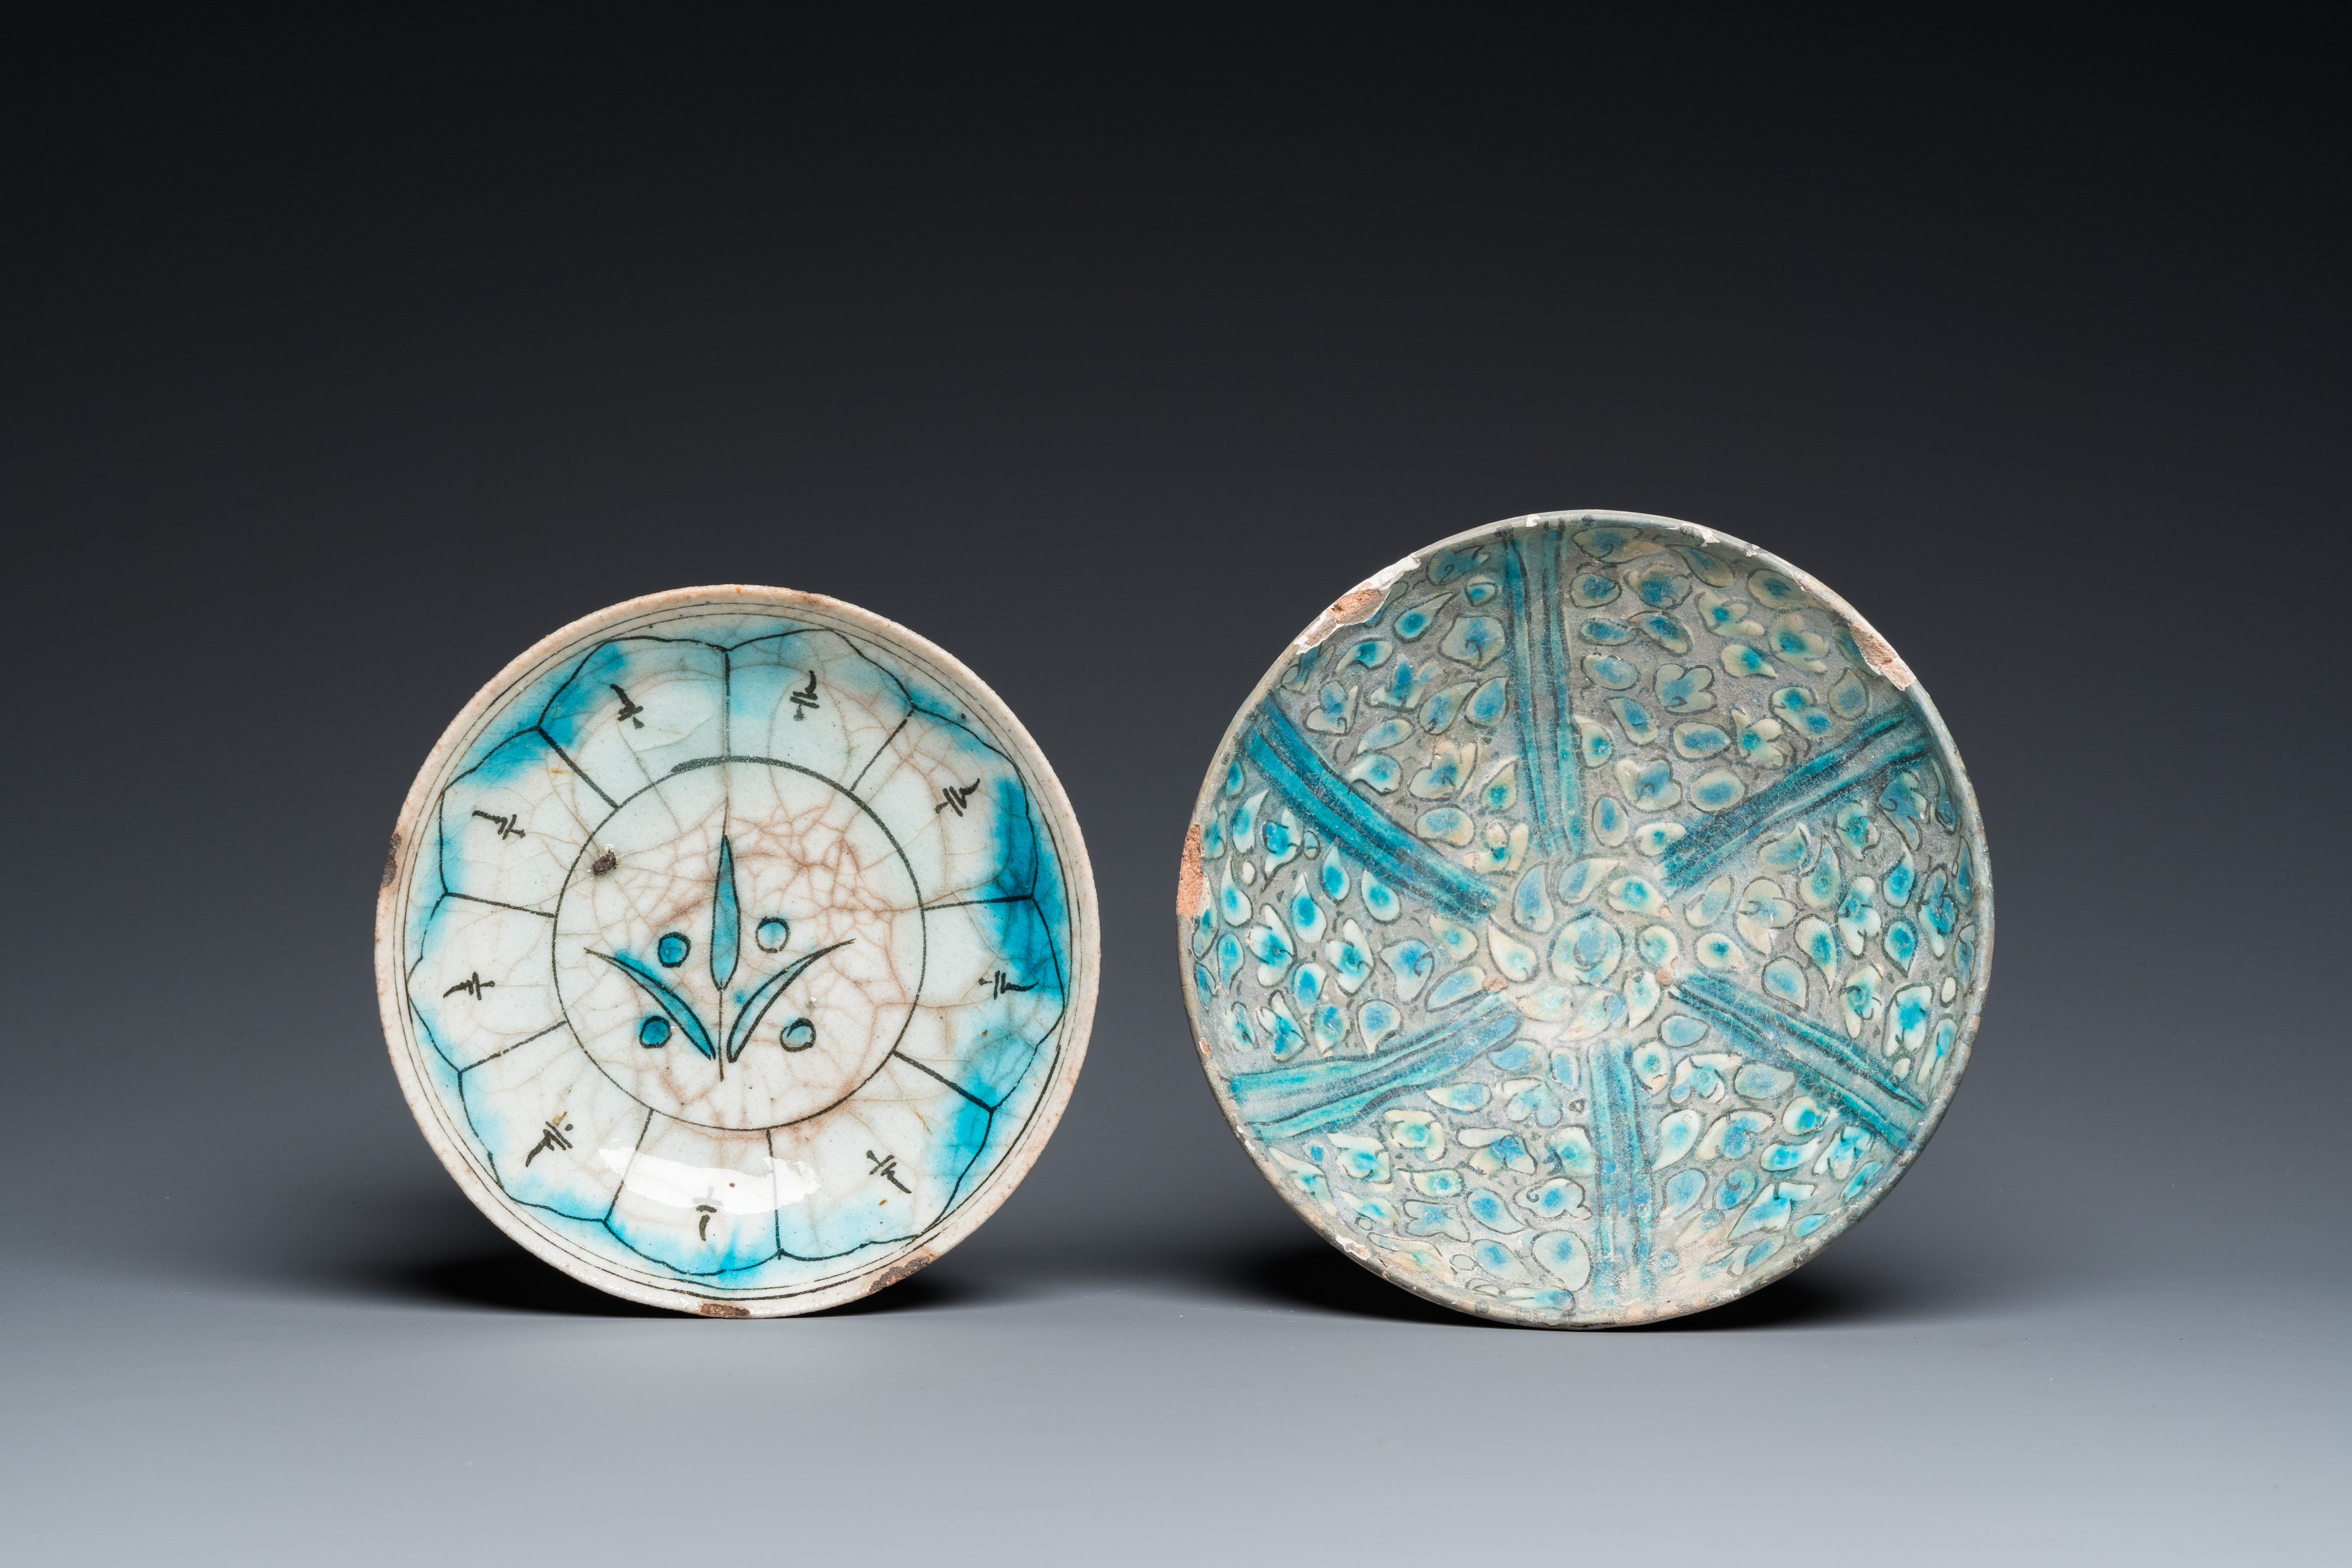 Twelve Ottoman and Persian pottery wares, 13th C. and later - Image 27 of 34